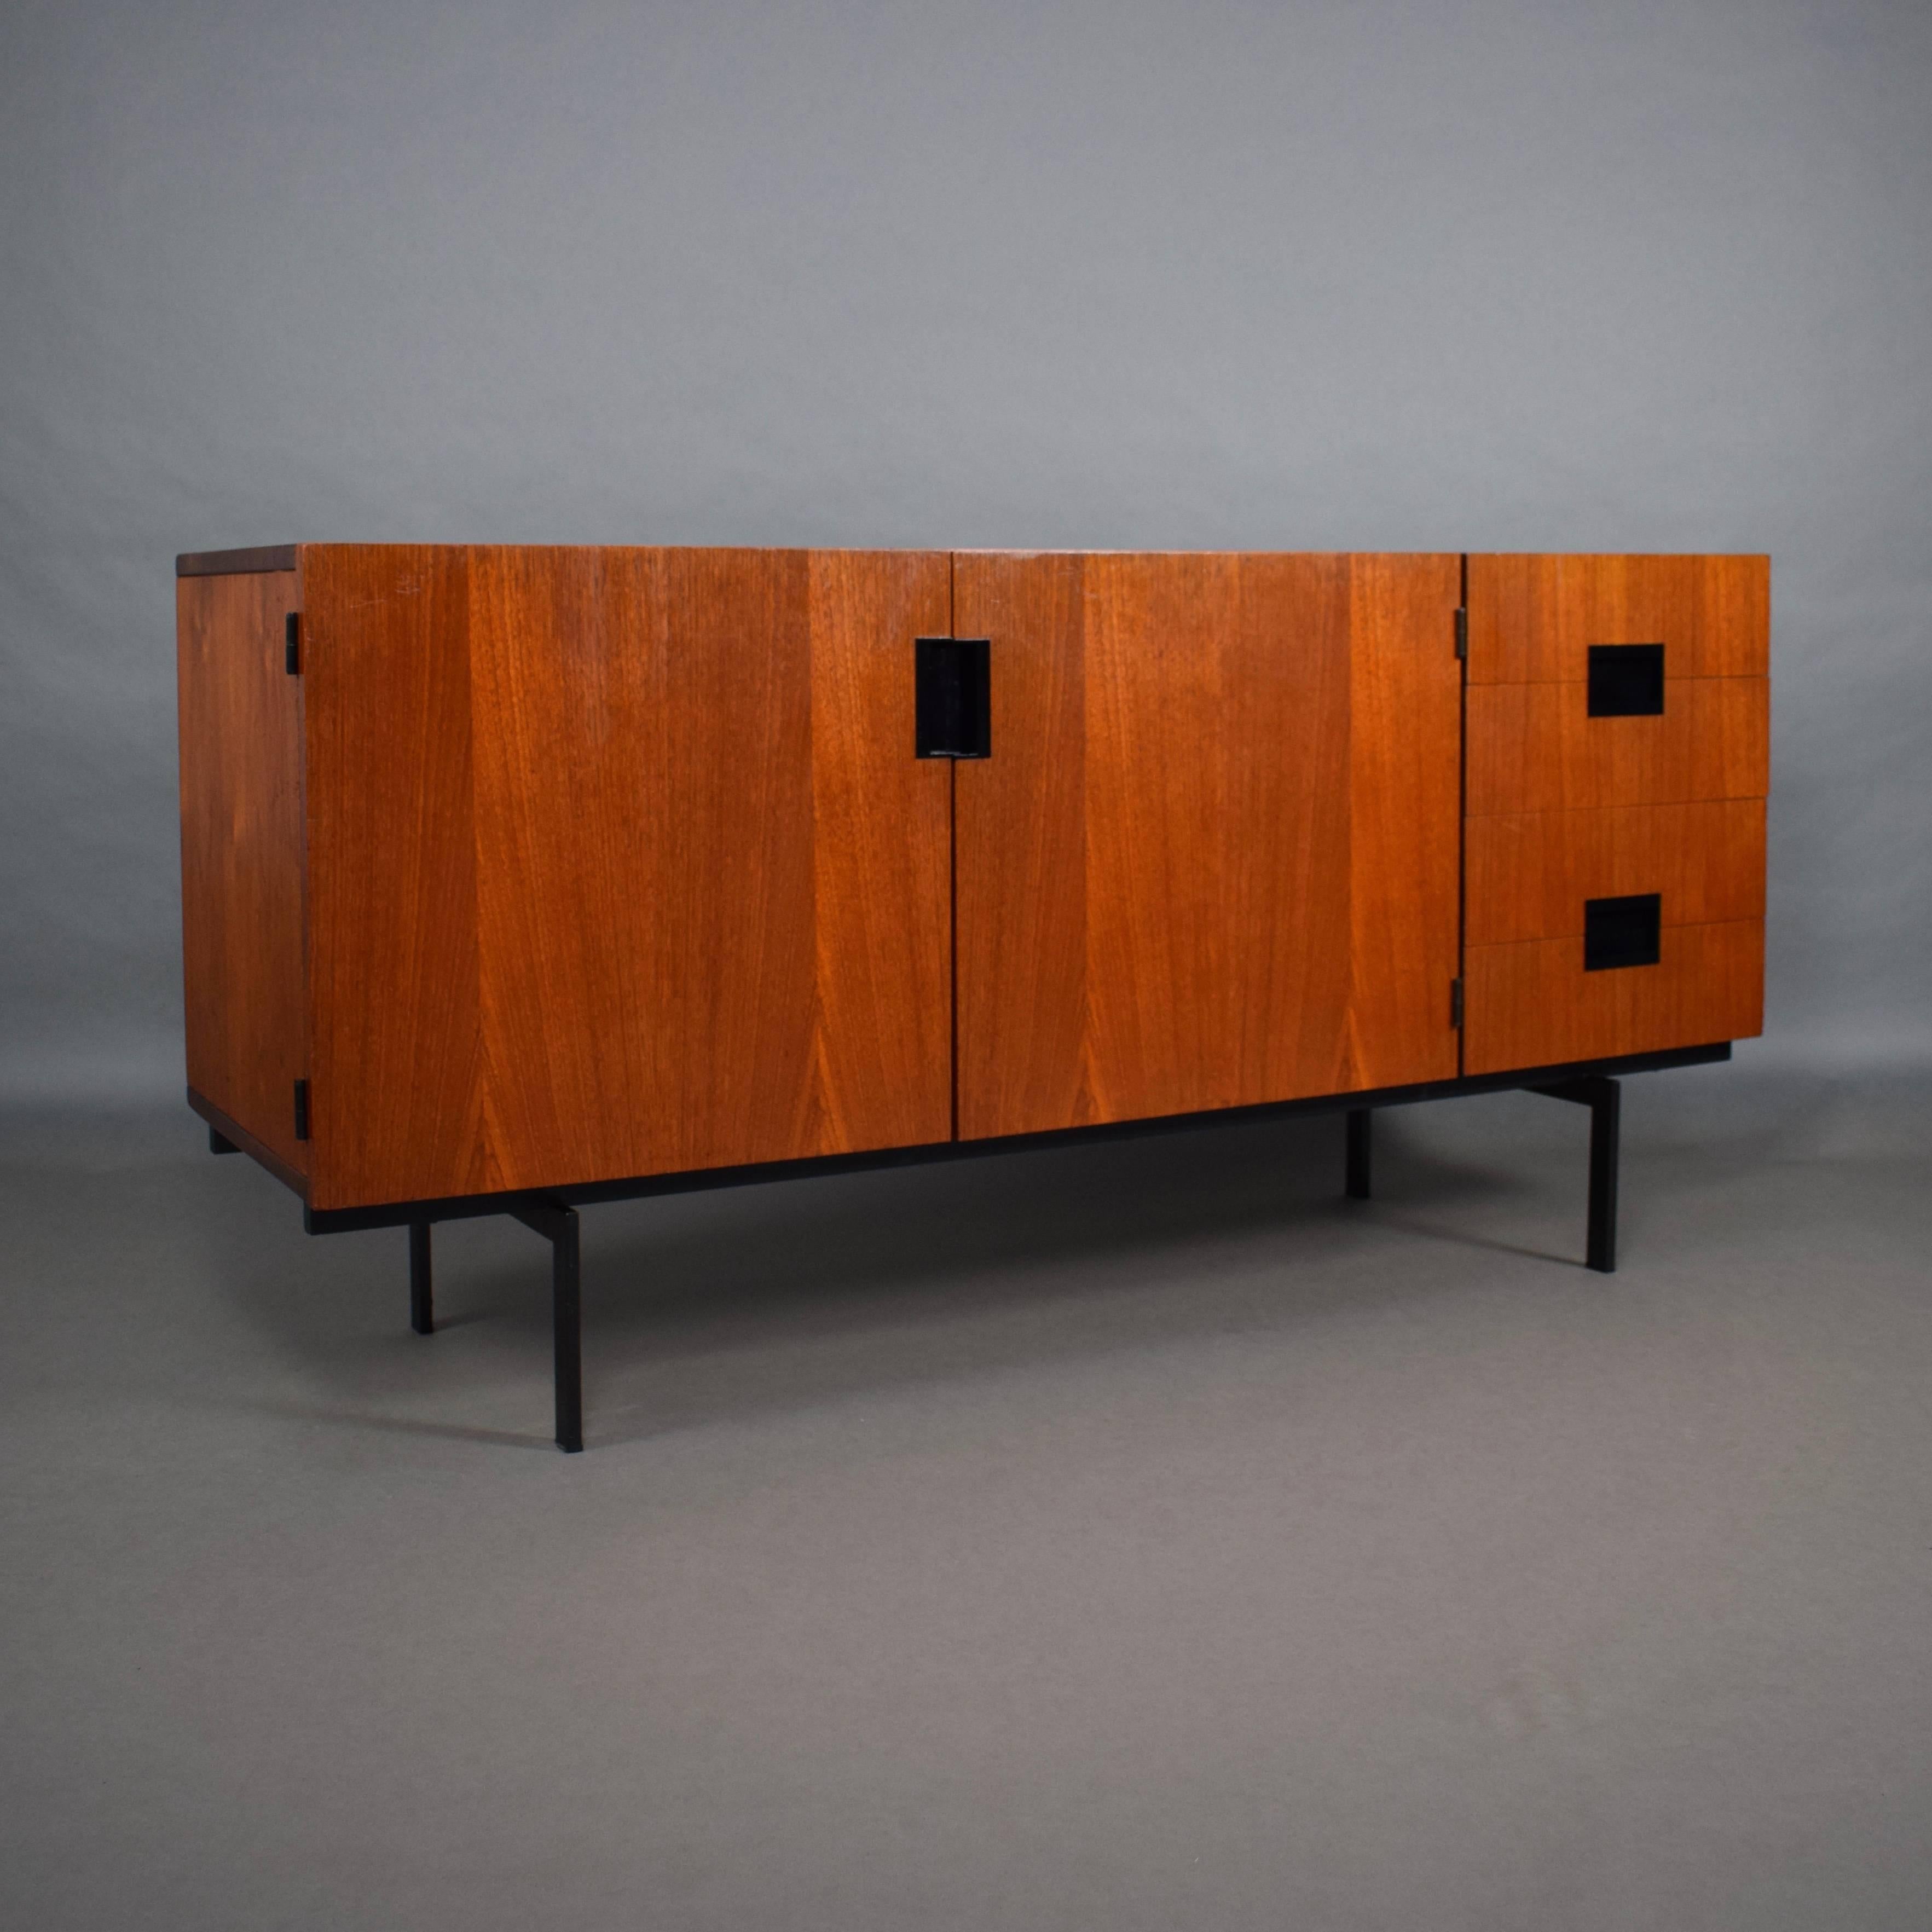 Rare size DU-01 Japanese series sideboard by Cees Braakman.
Teak with black lacquered metal base.
The inside of the drawers is beautifully made of bent plywood.
Faded stain on top and superficial scratch on top (see images 8 and 9). These two